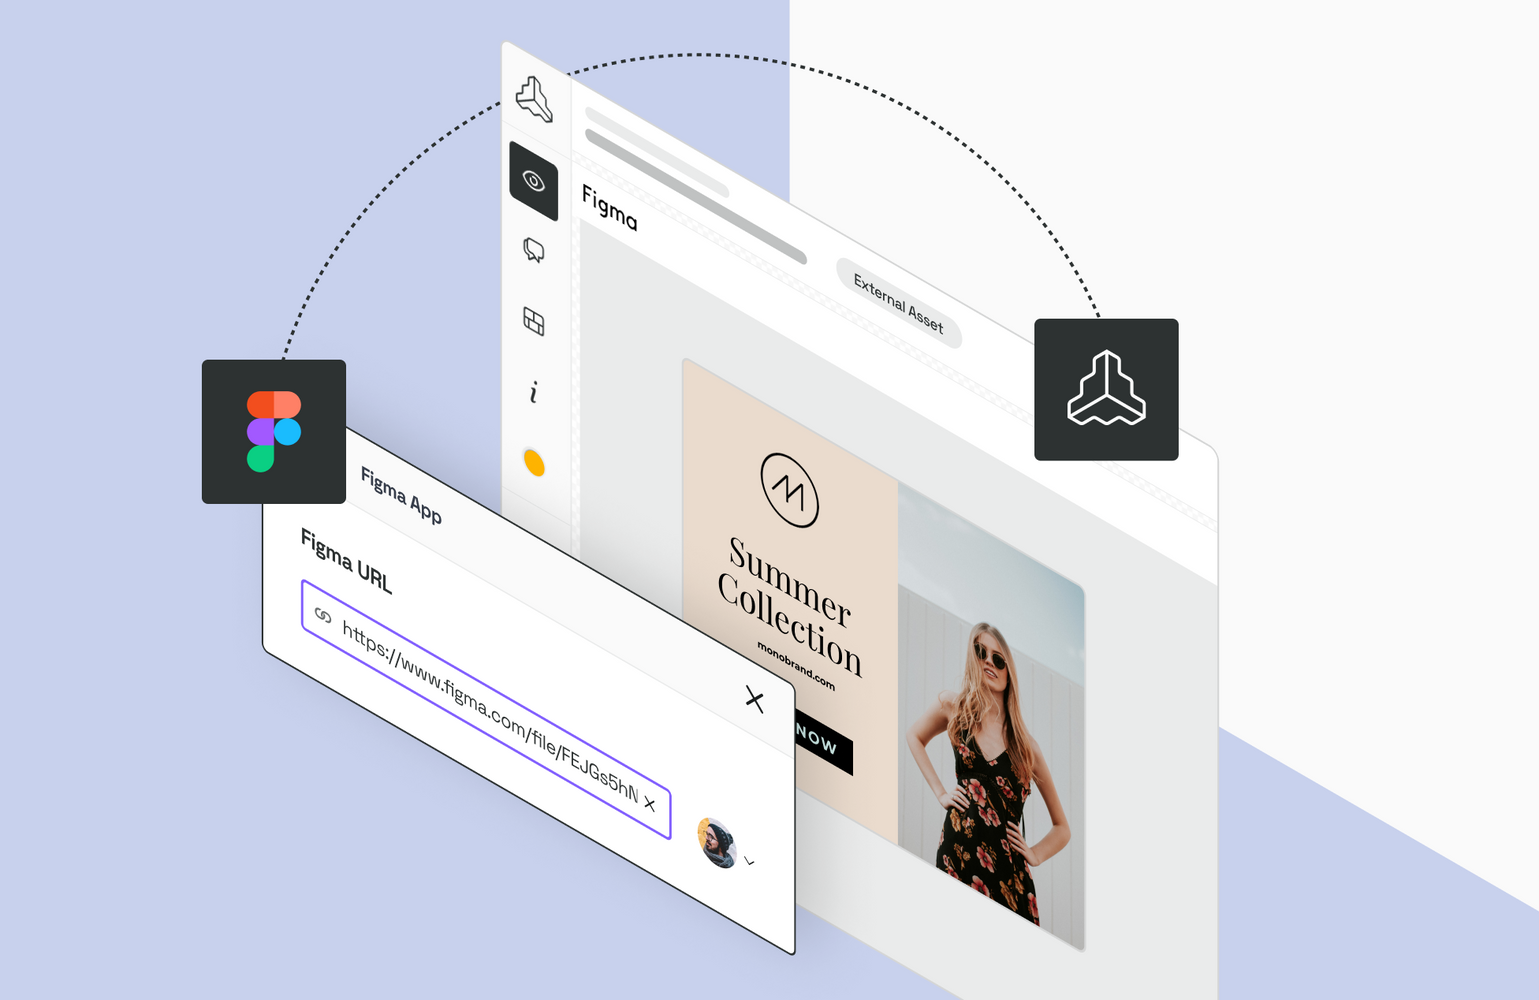  Introducing the Figma App